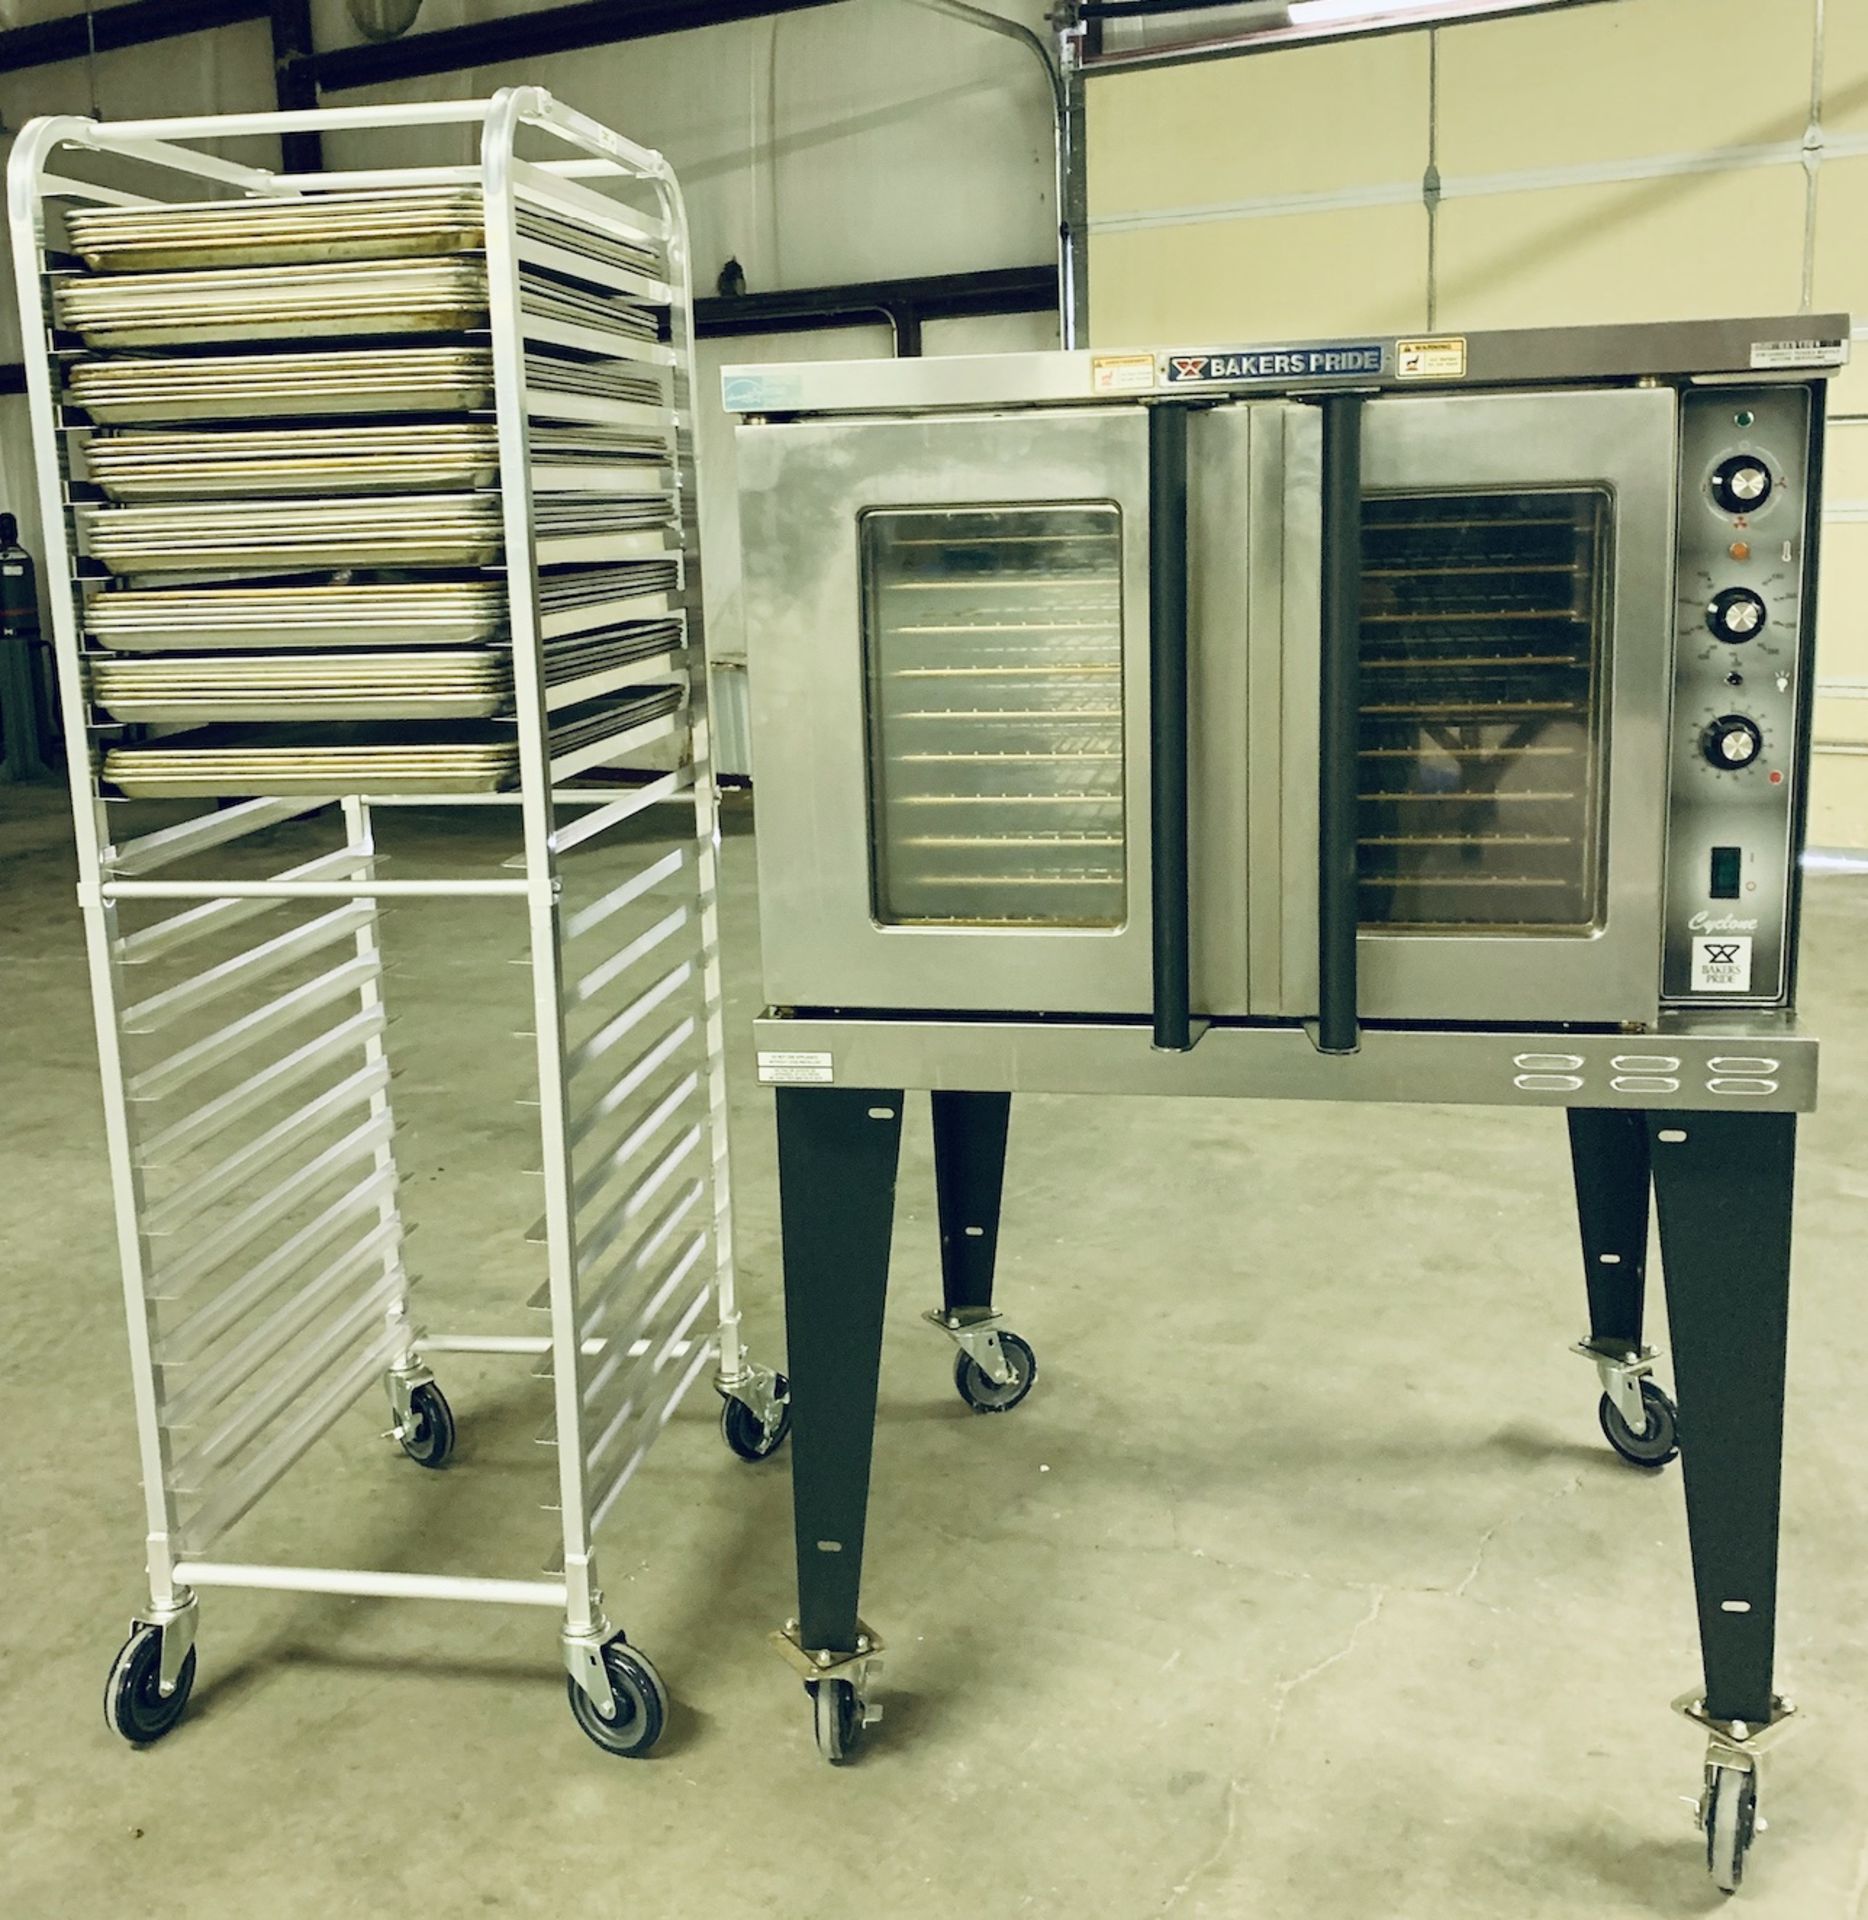 Used Bakers Pride Cyclone Series Single Deck Full Size Electric Decarb Oven. Model BCO-E1w/ 39 trays